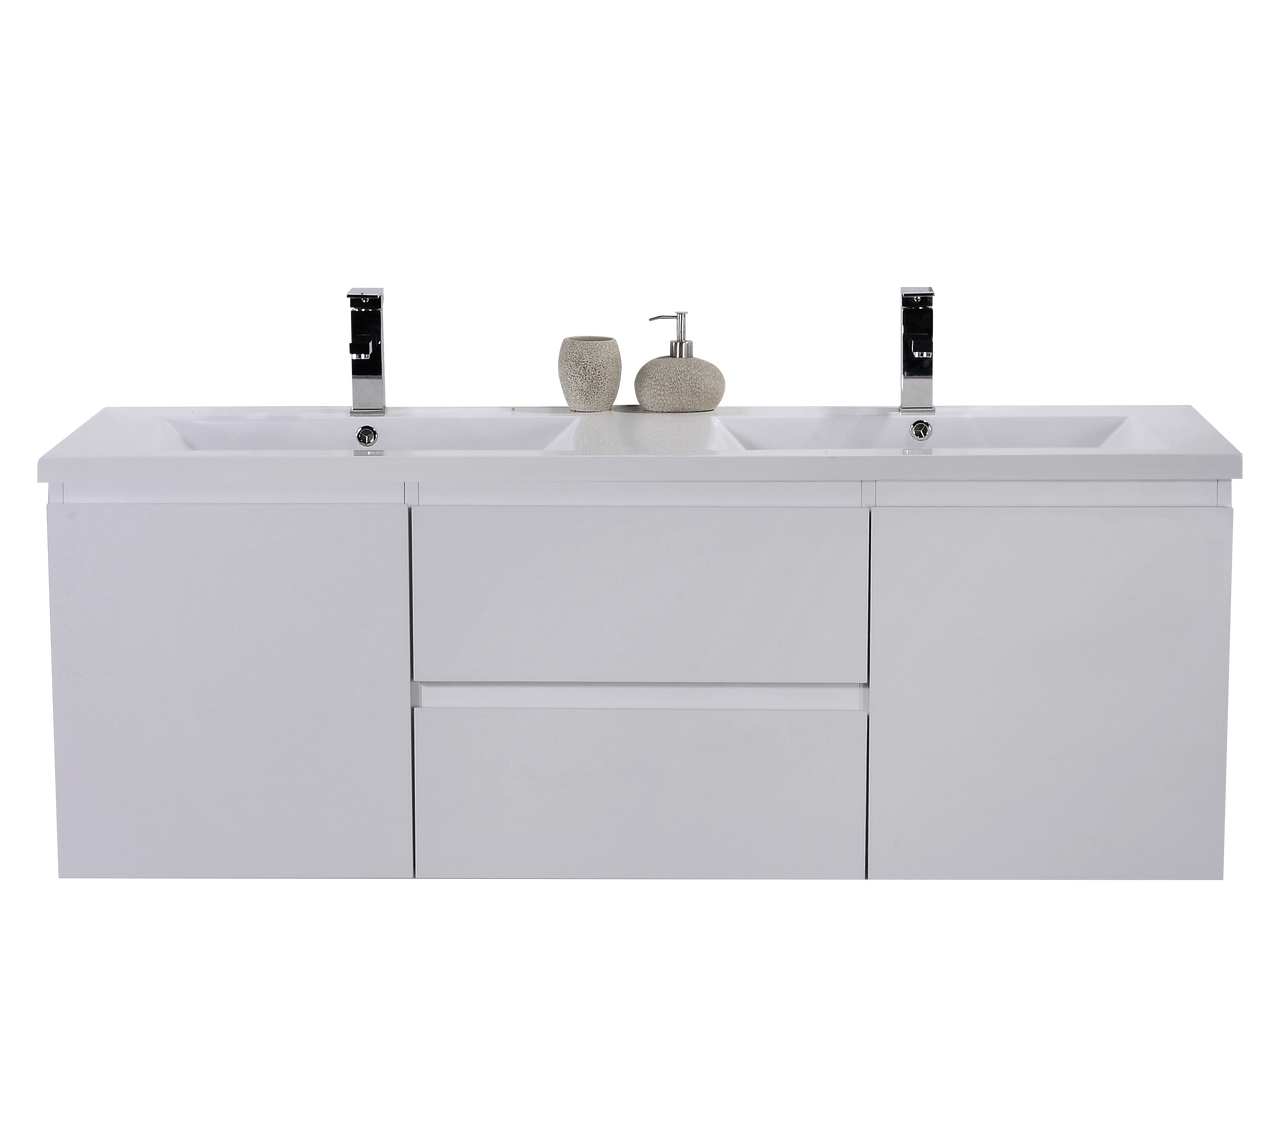 MOB 60" DOUBLE SINK HIGH GLOSS WHITE WALL MOUNTED MODERN BATHROOM VANITY WITH REEINFORCED ACRYLIC SINK